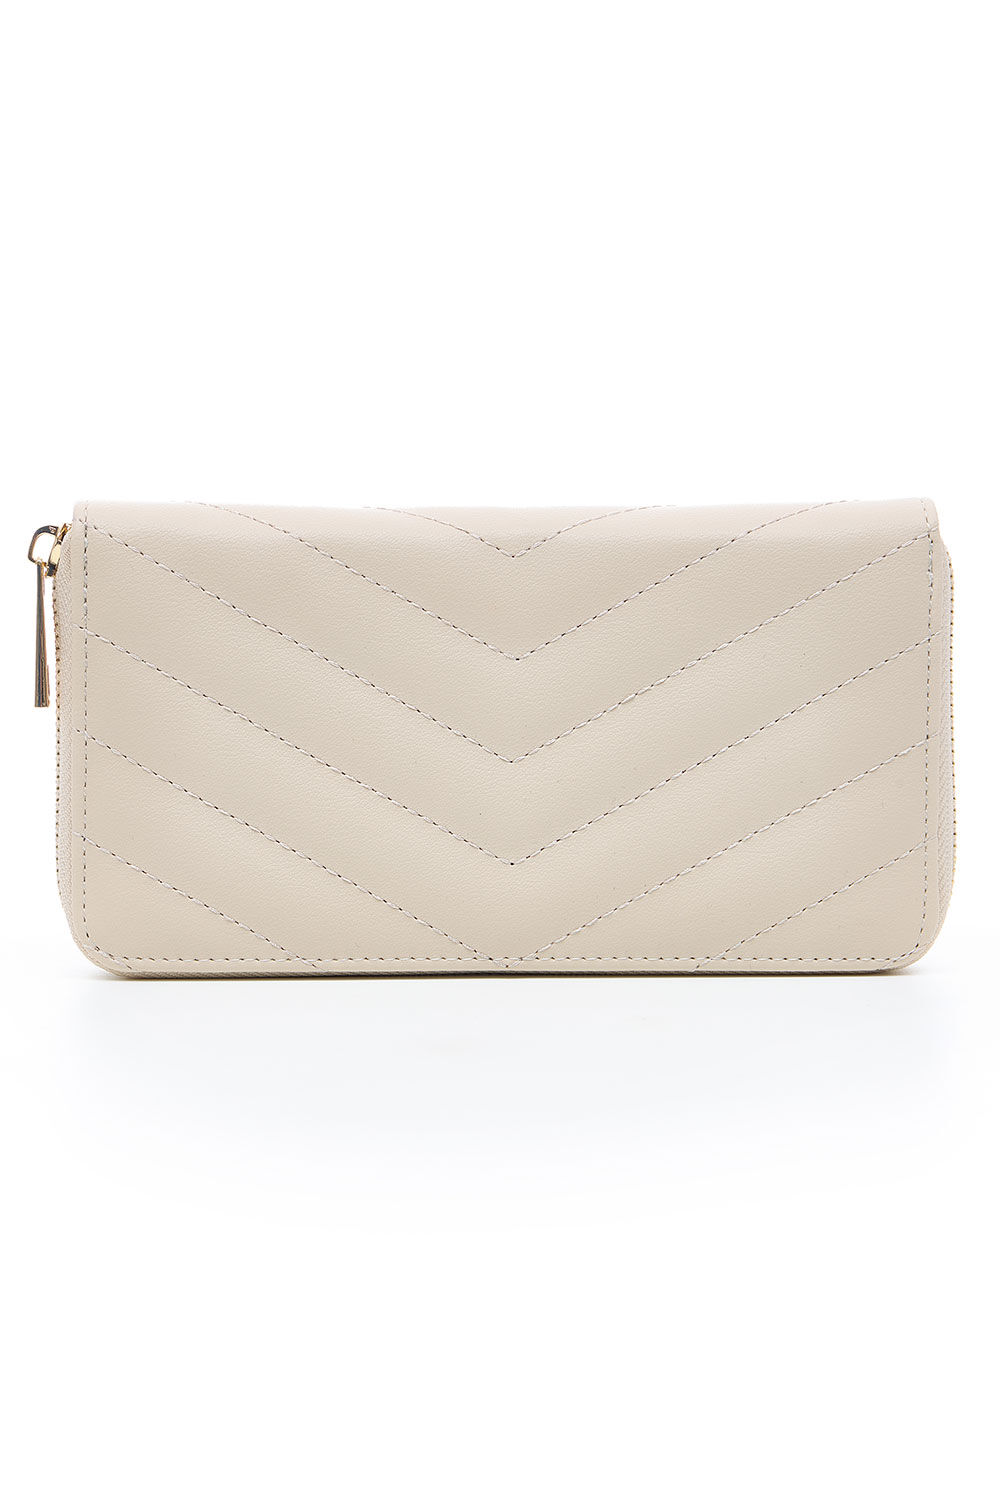 Bonmarche Grey Quilted Purse